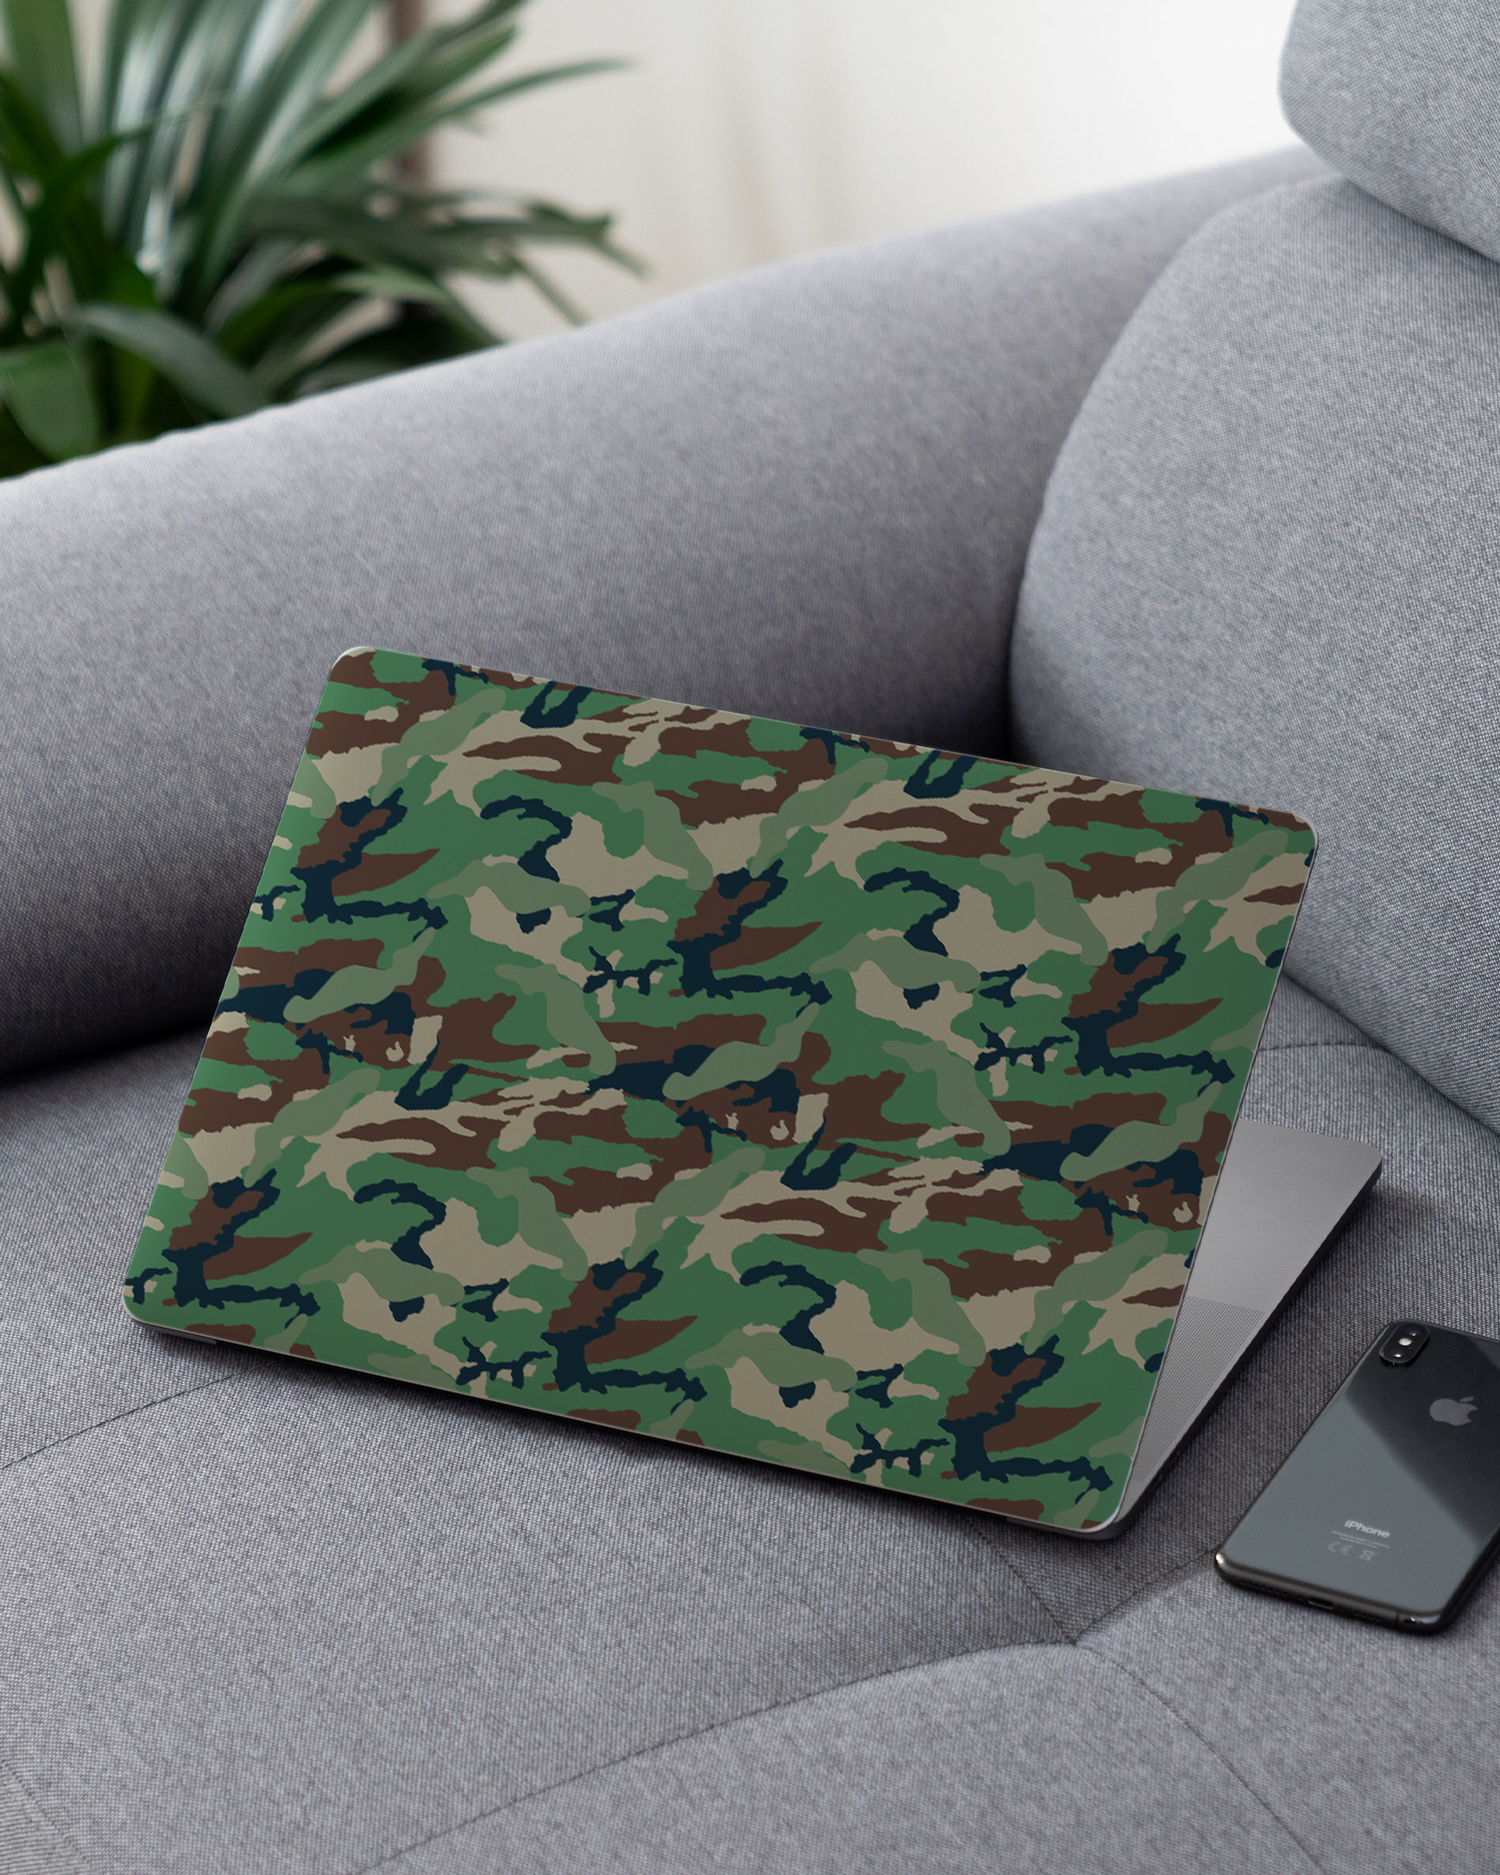 Green and Brown Camo Laptop Skin for 13 inch Apple MacBooks on a couch